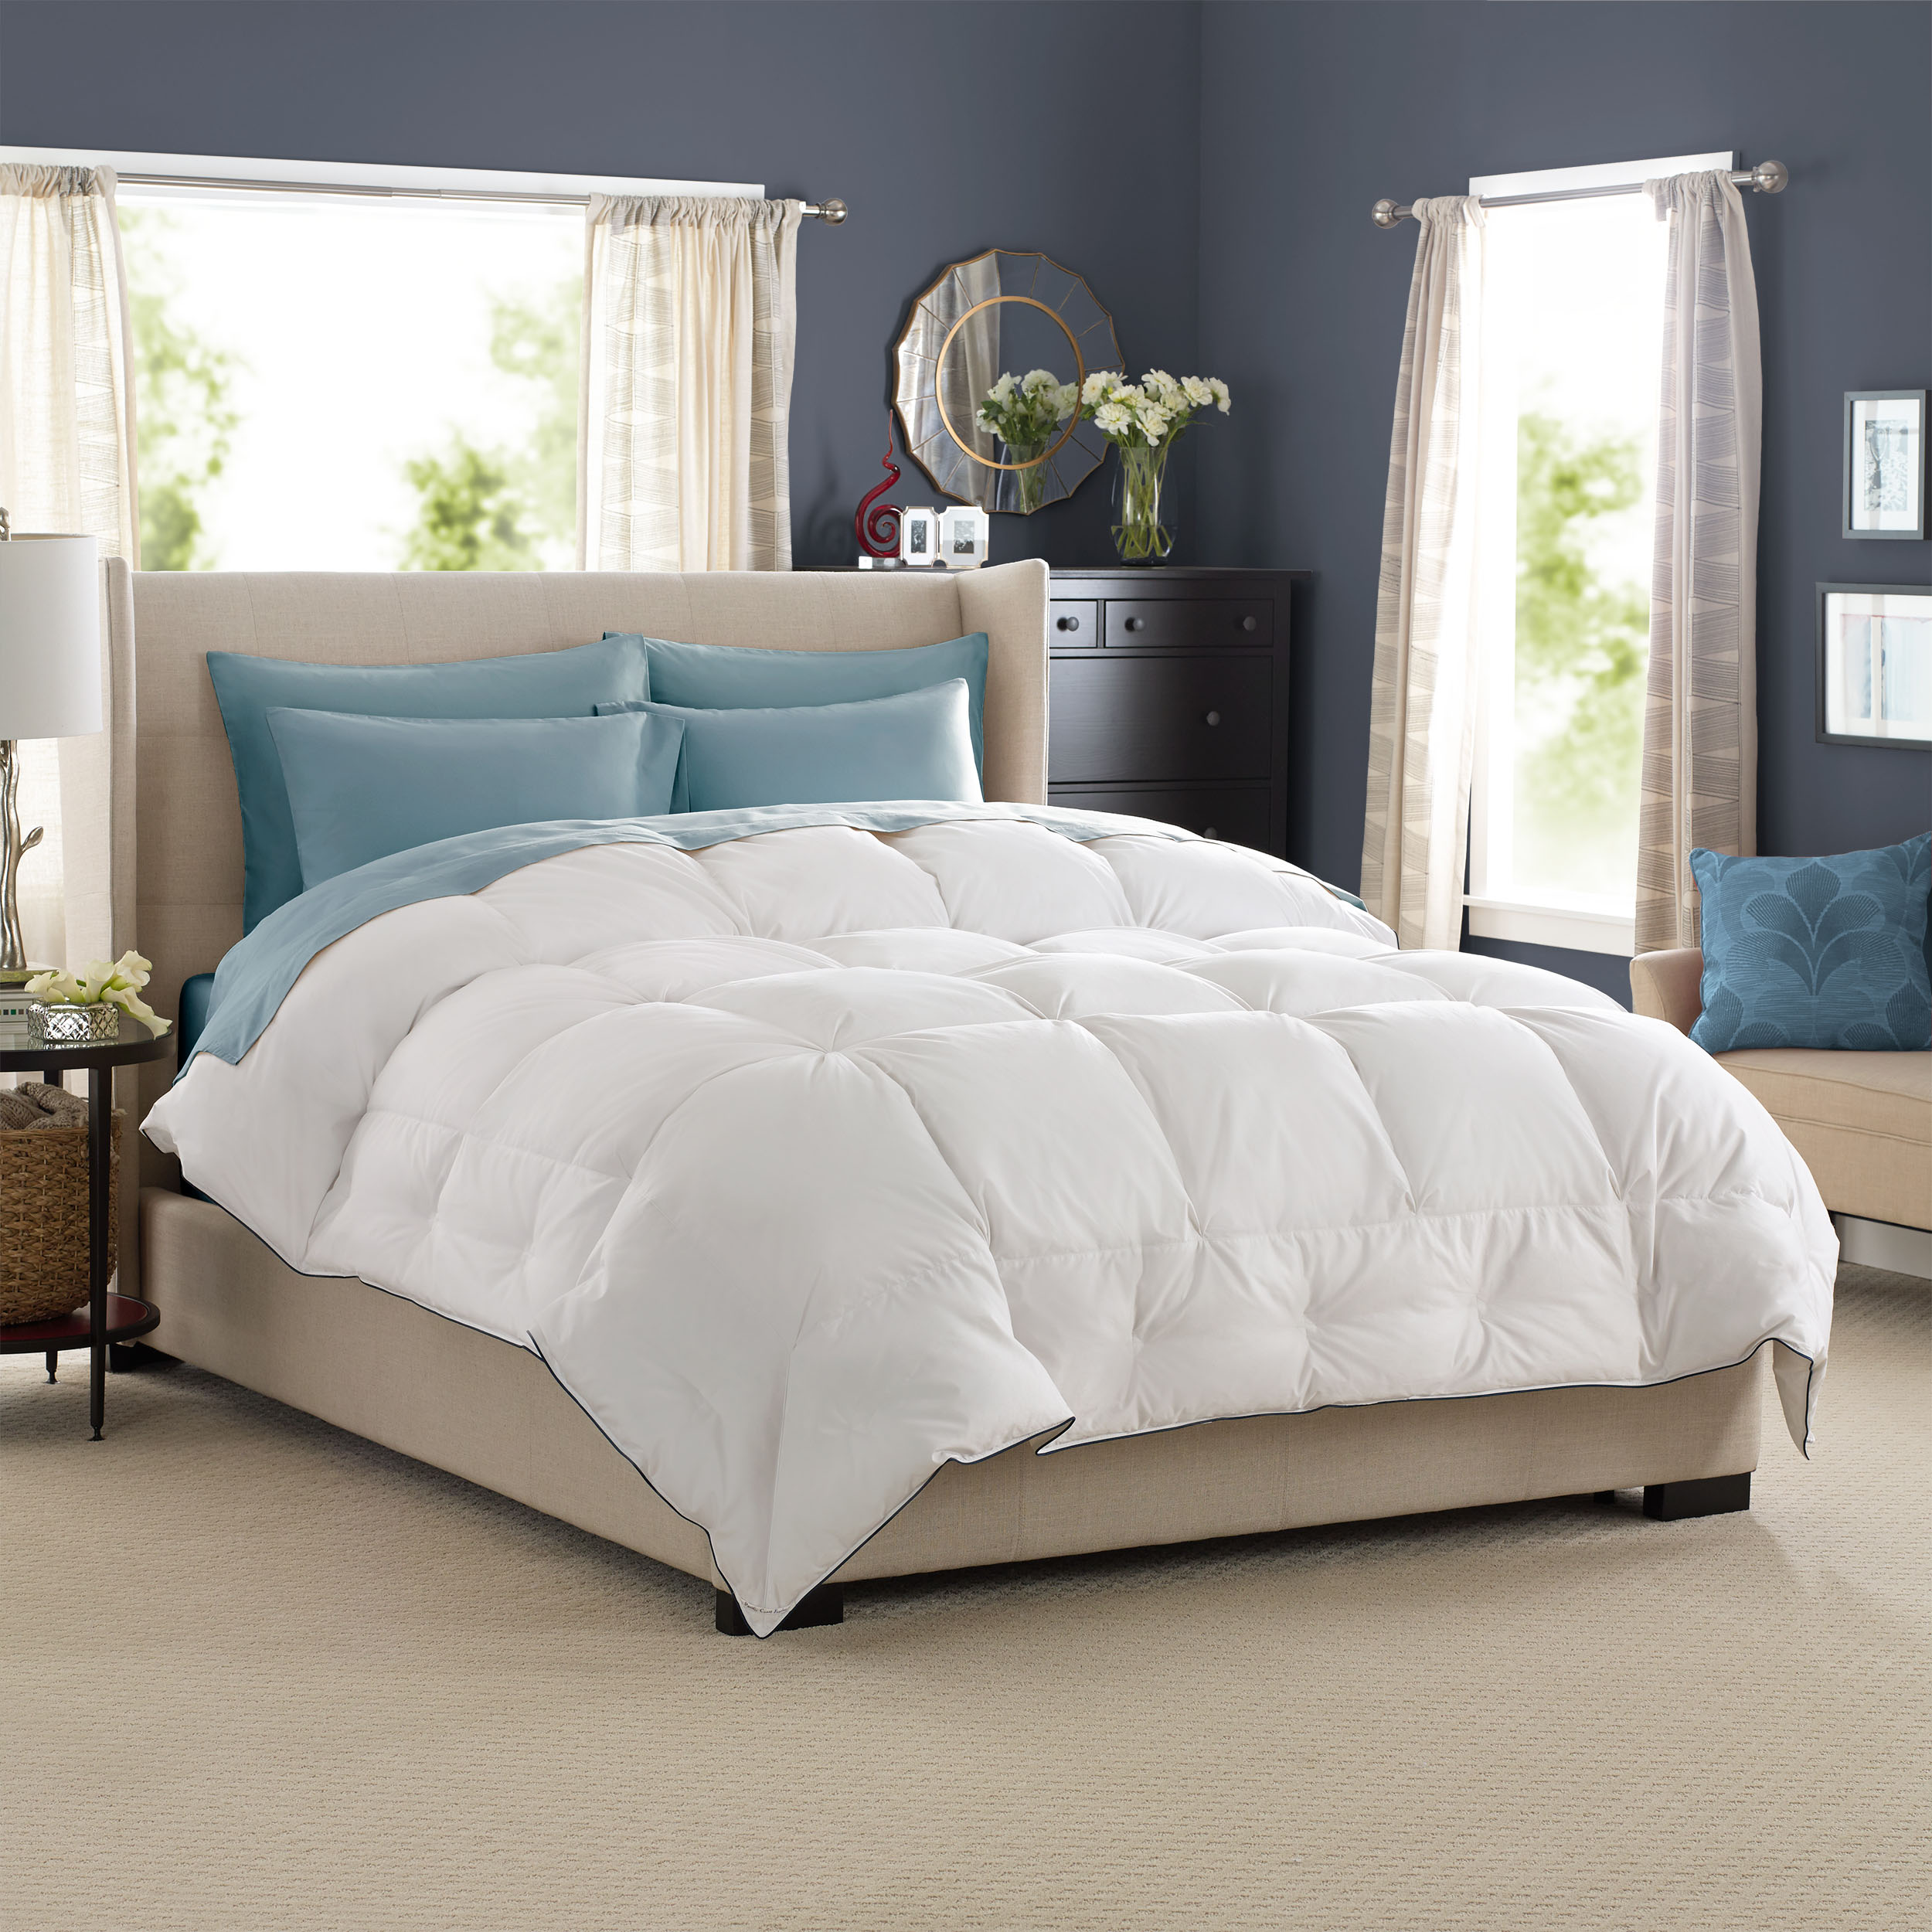 Why Pacific Coast Is Best At Down Comforters Pacific Coast Bedding